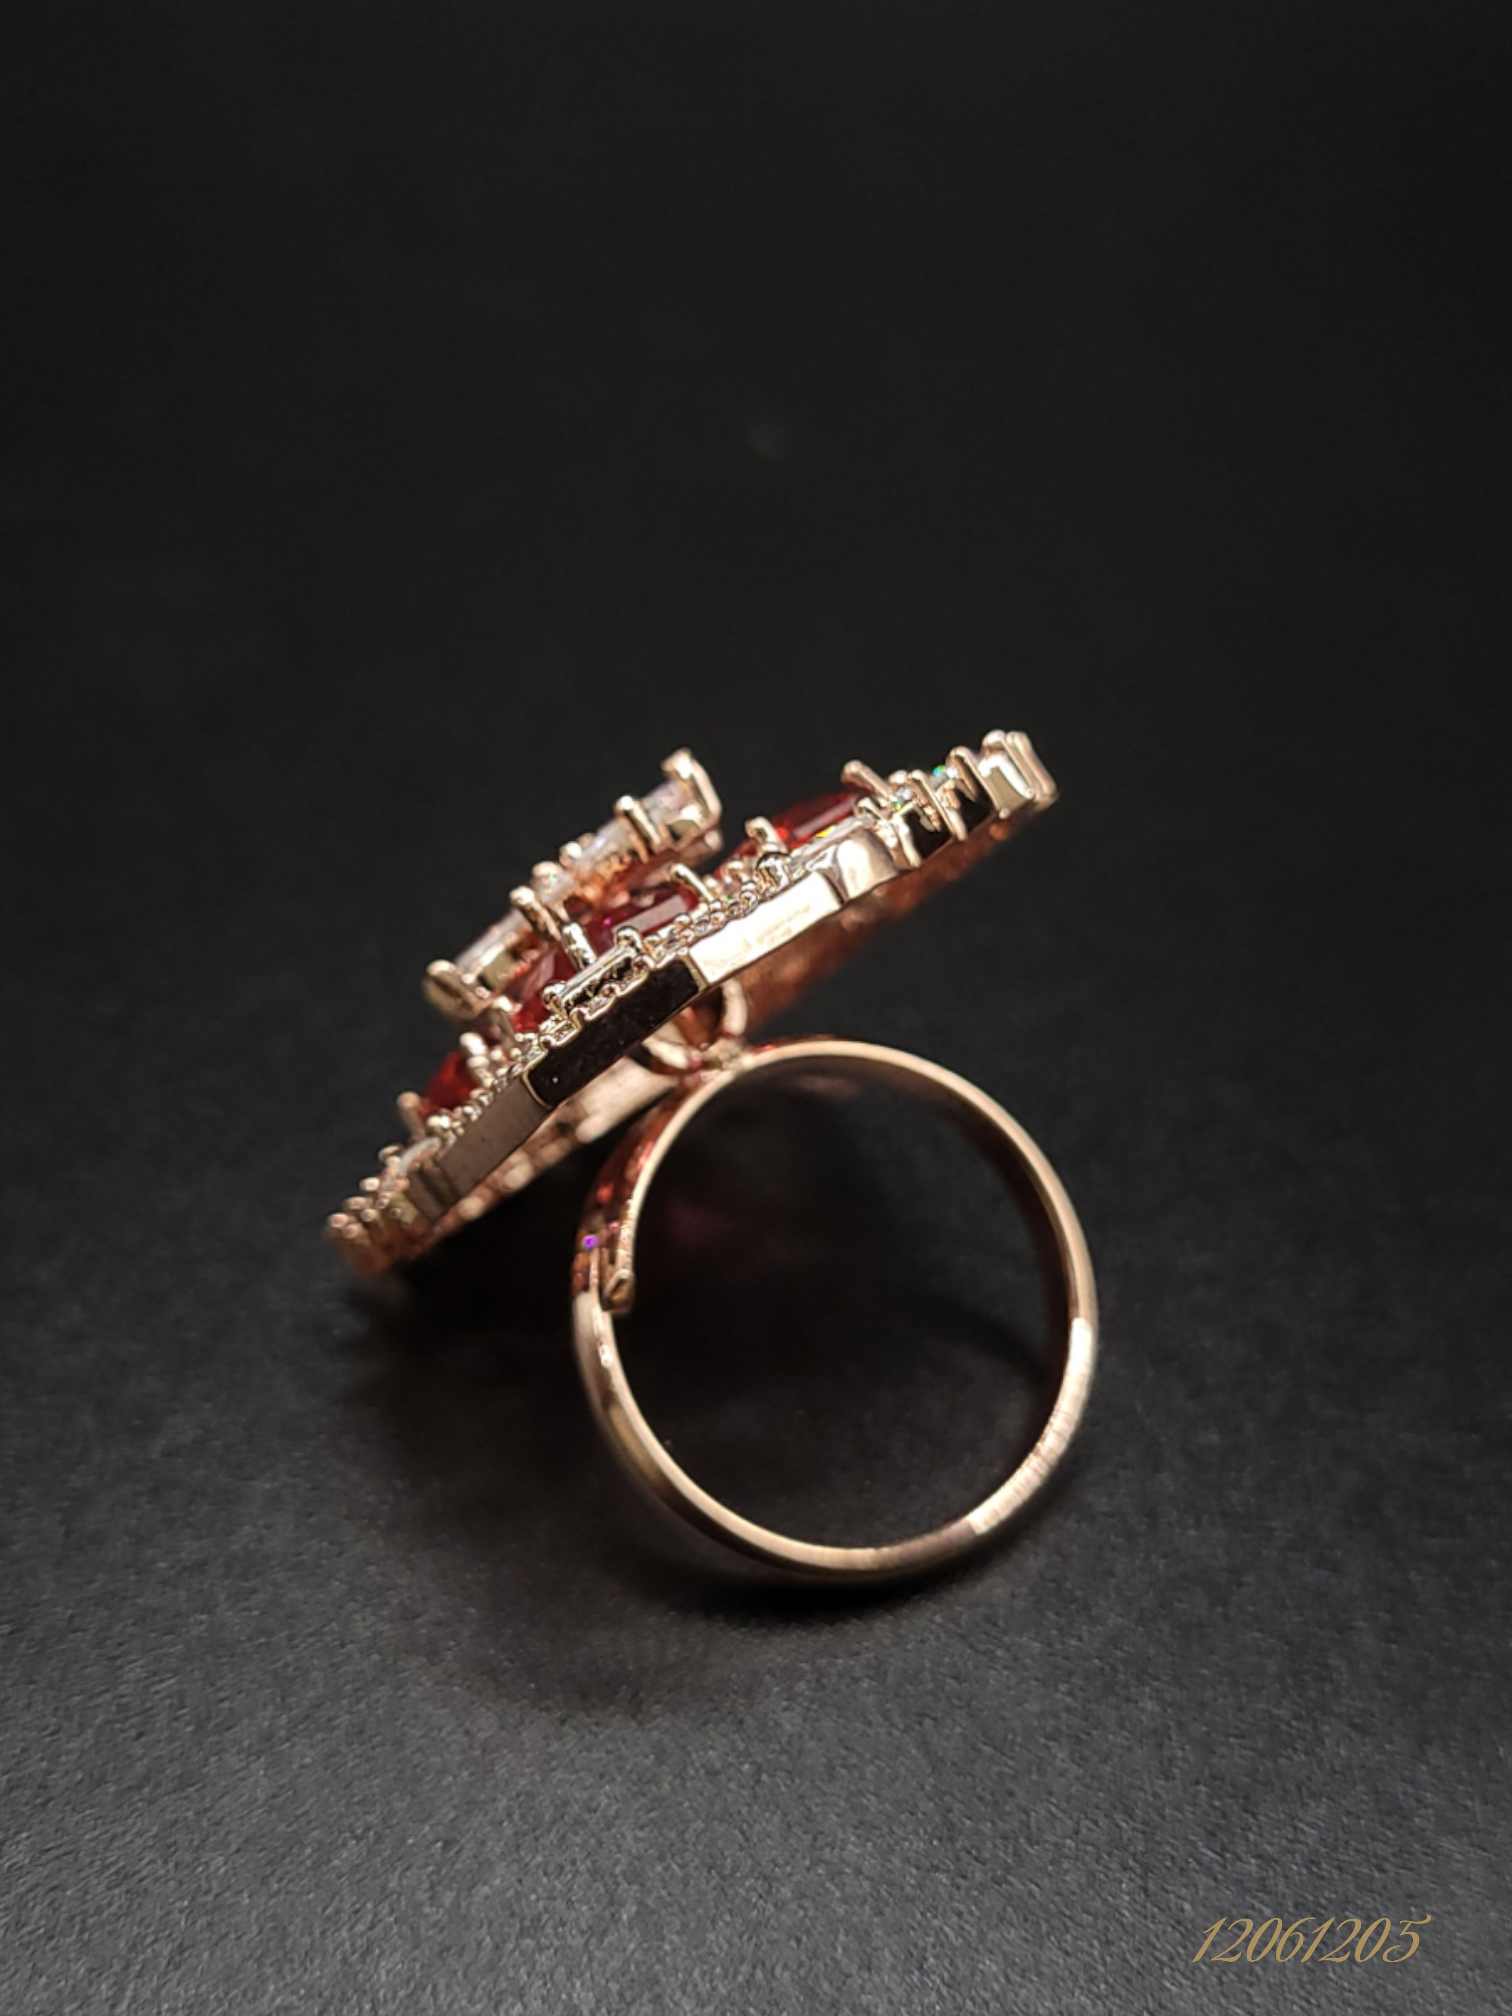 SPARKLING ROSE GOLD DIAMOND RING WITH PINK STONE